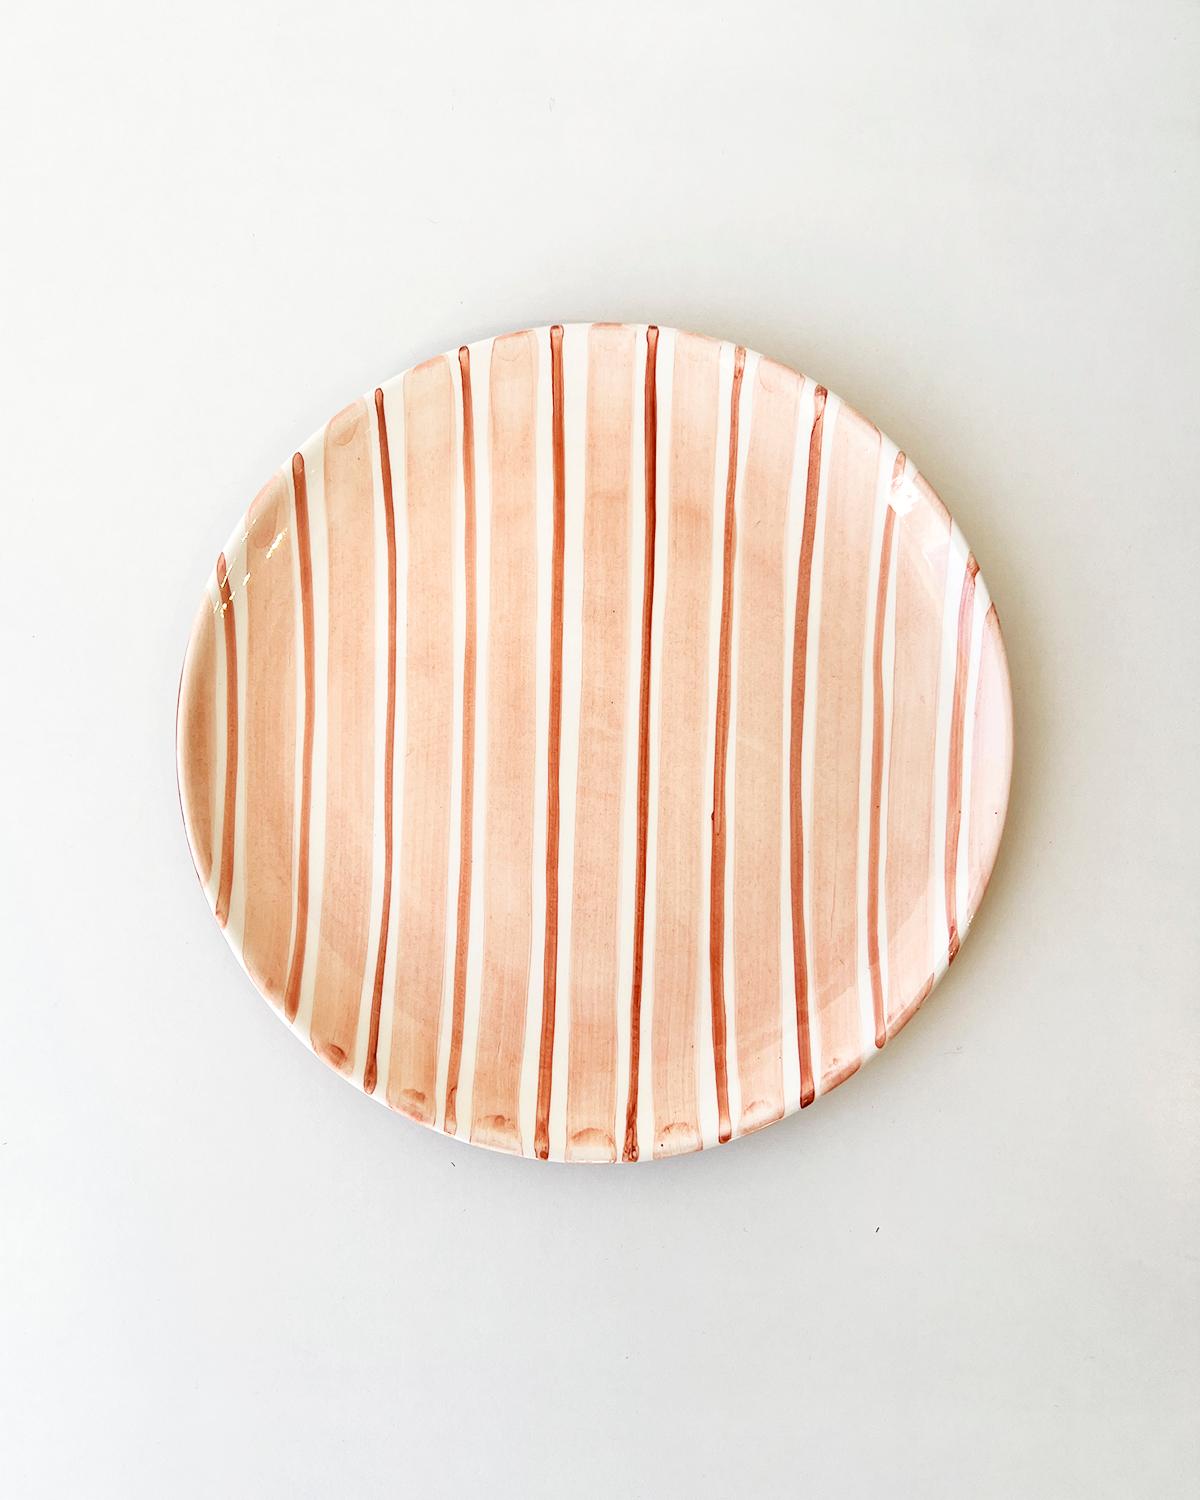 Casa Cubista Cabana Pink Striped Terracotta Dinner Plates In New Condition For Sale In West Hollywood, CA